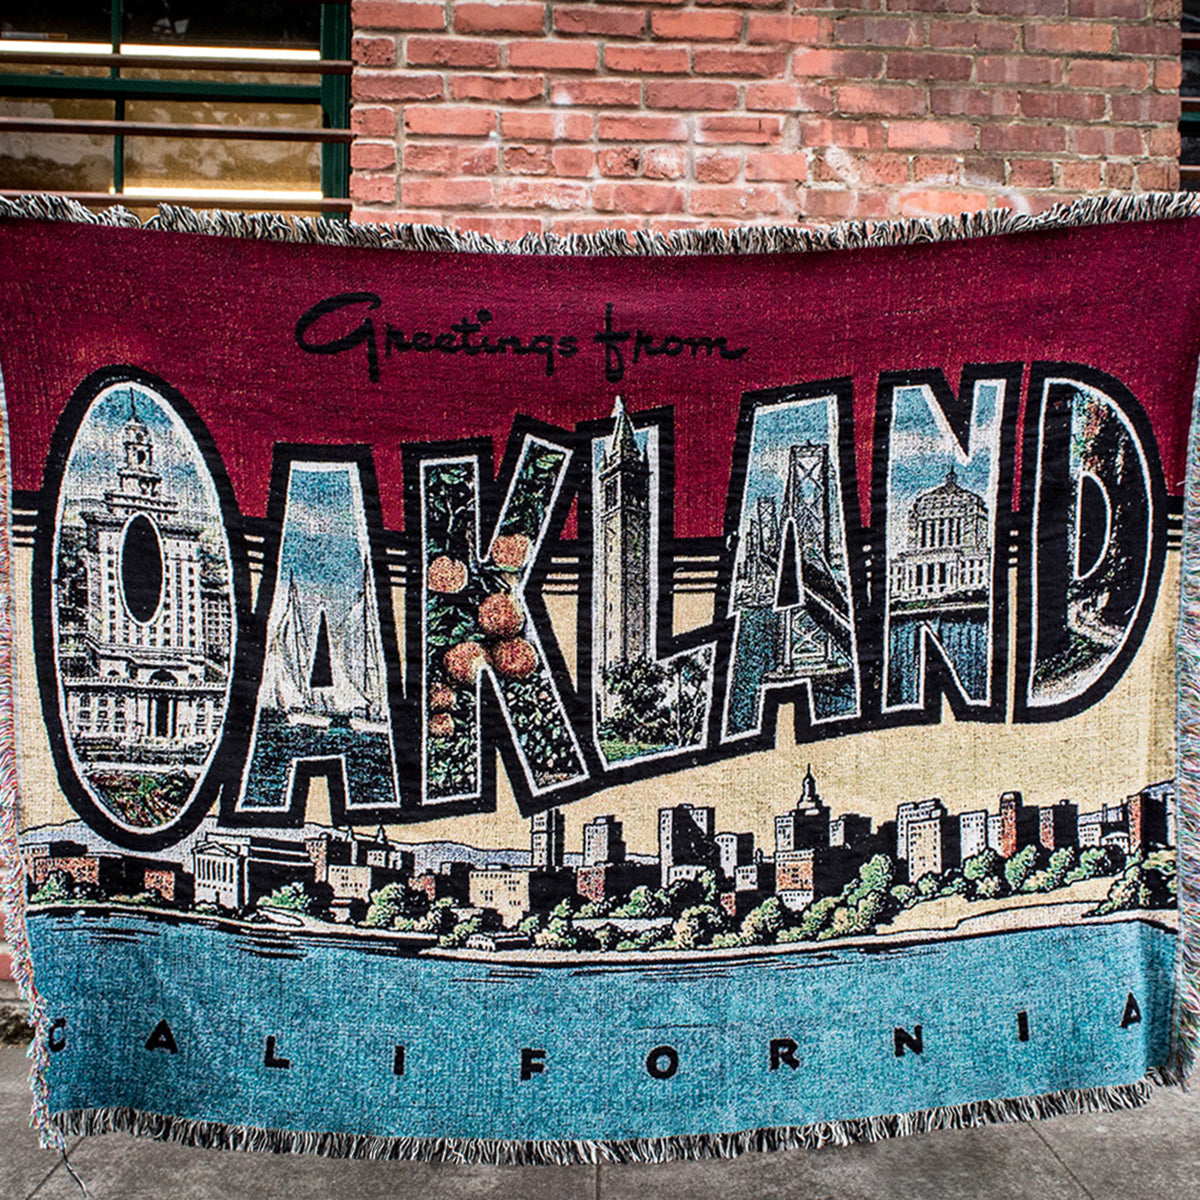 Photo image outside of throw Blanket - Greetings From Oakland, Cotton, Made in USA